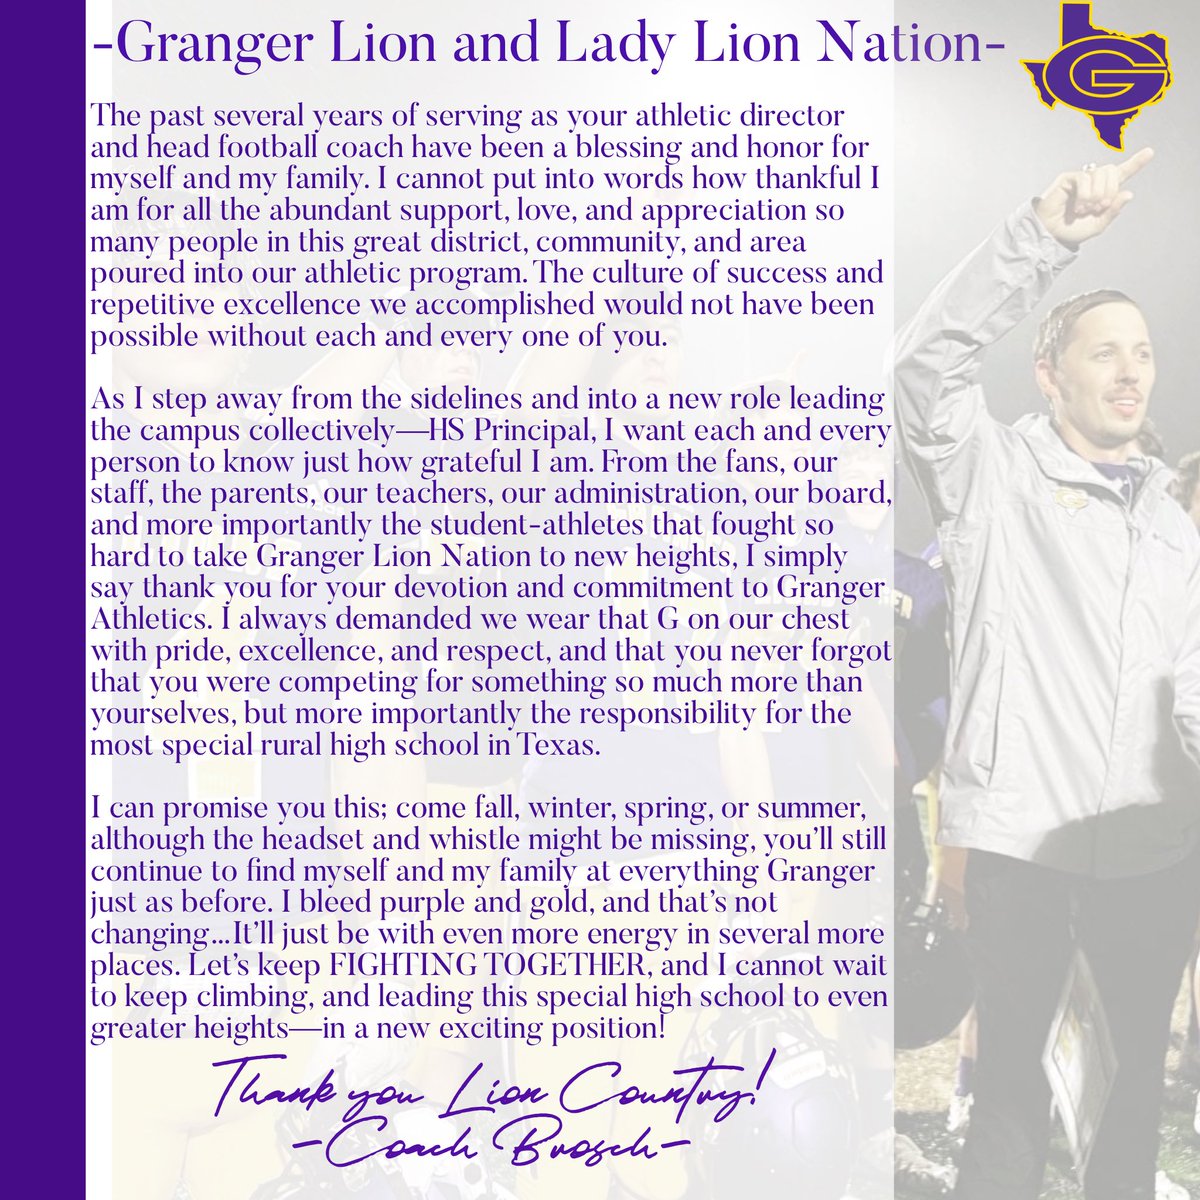 Thank you @GrangerHSsports @Granger_Lions @JeniNeatherlin! It’s been one heck of a ride!